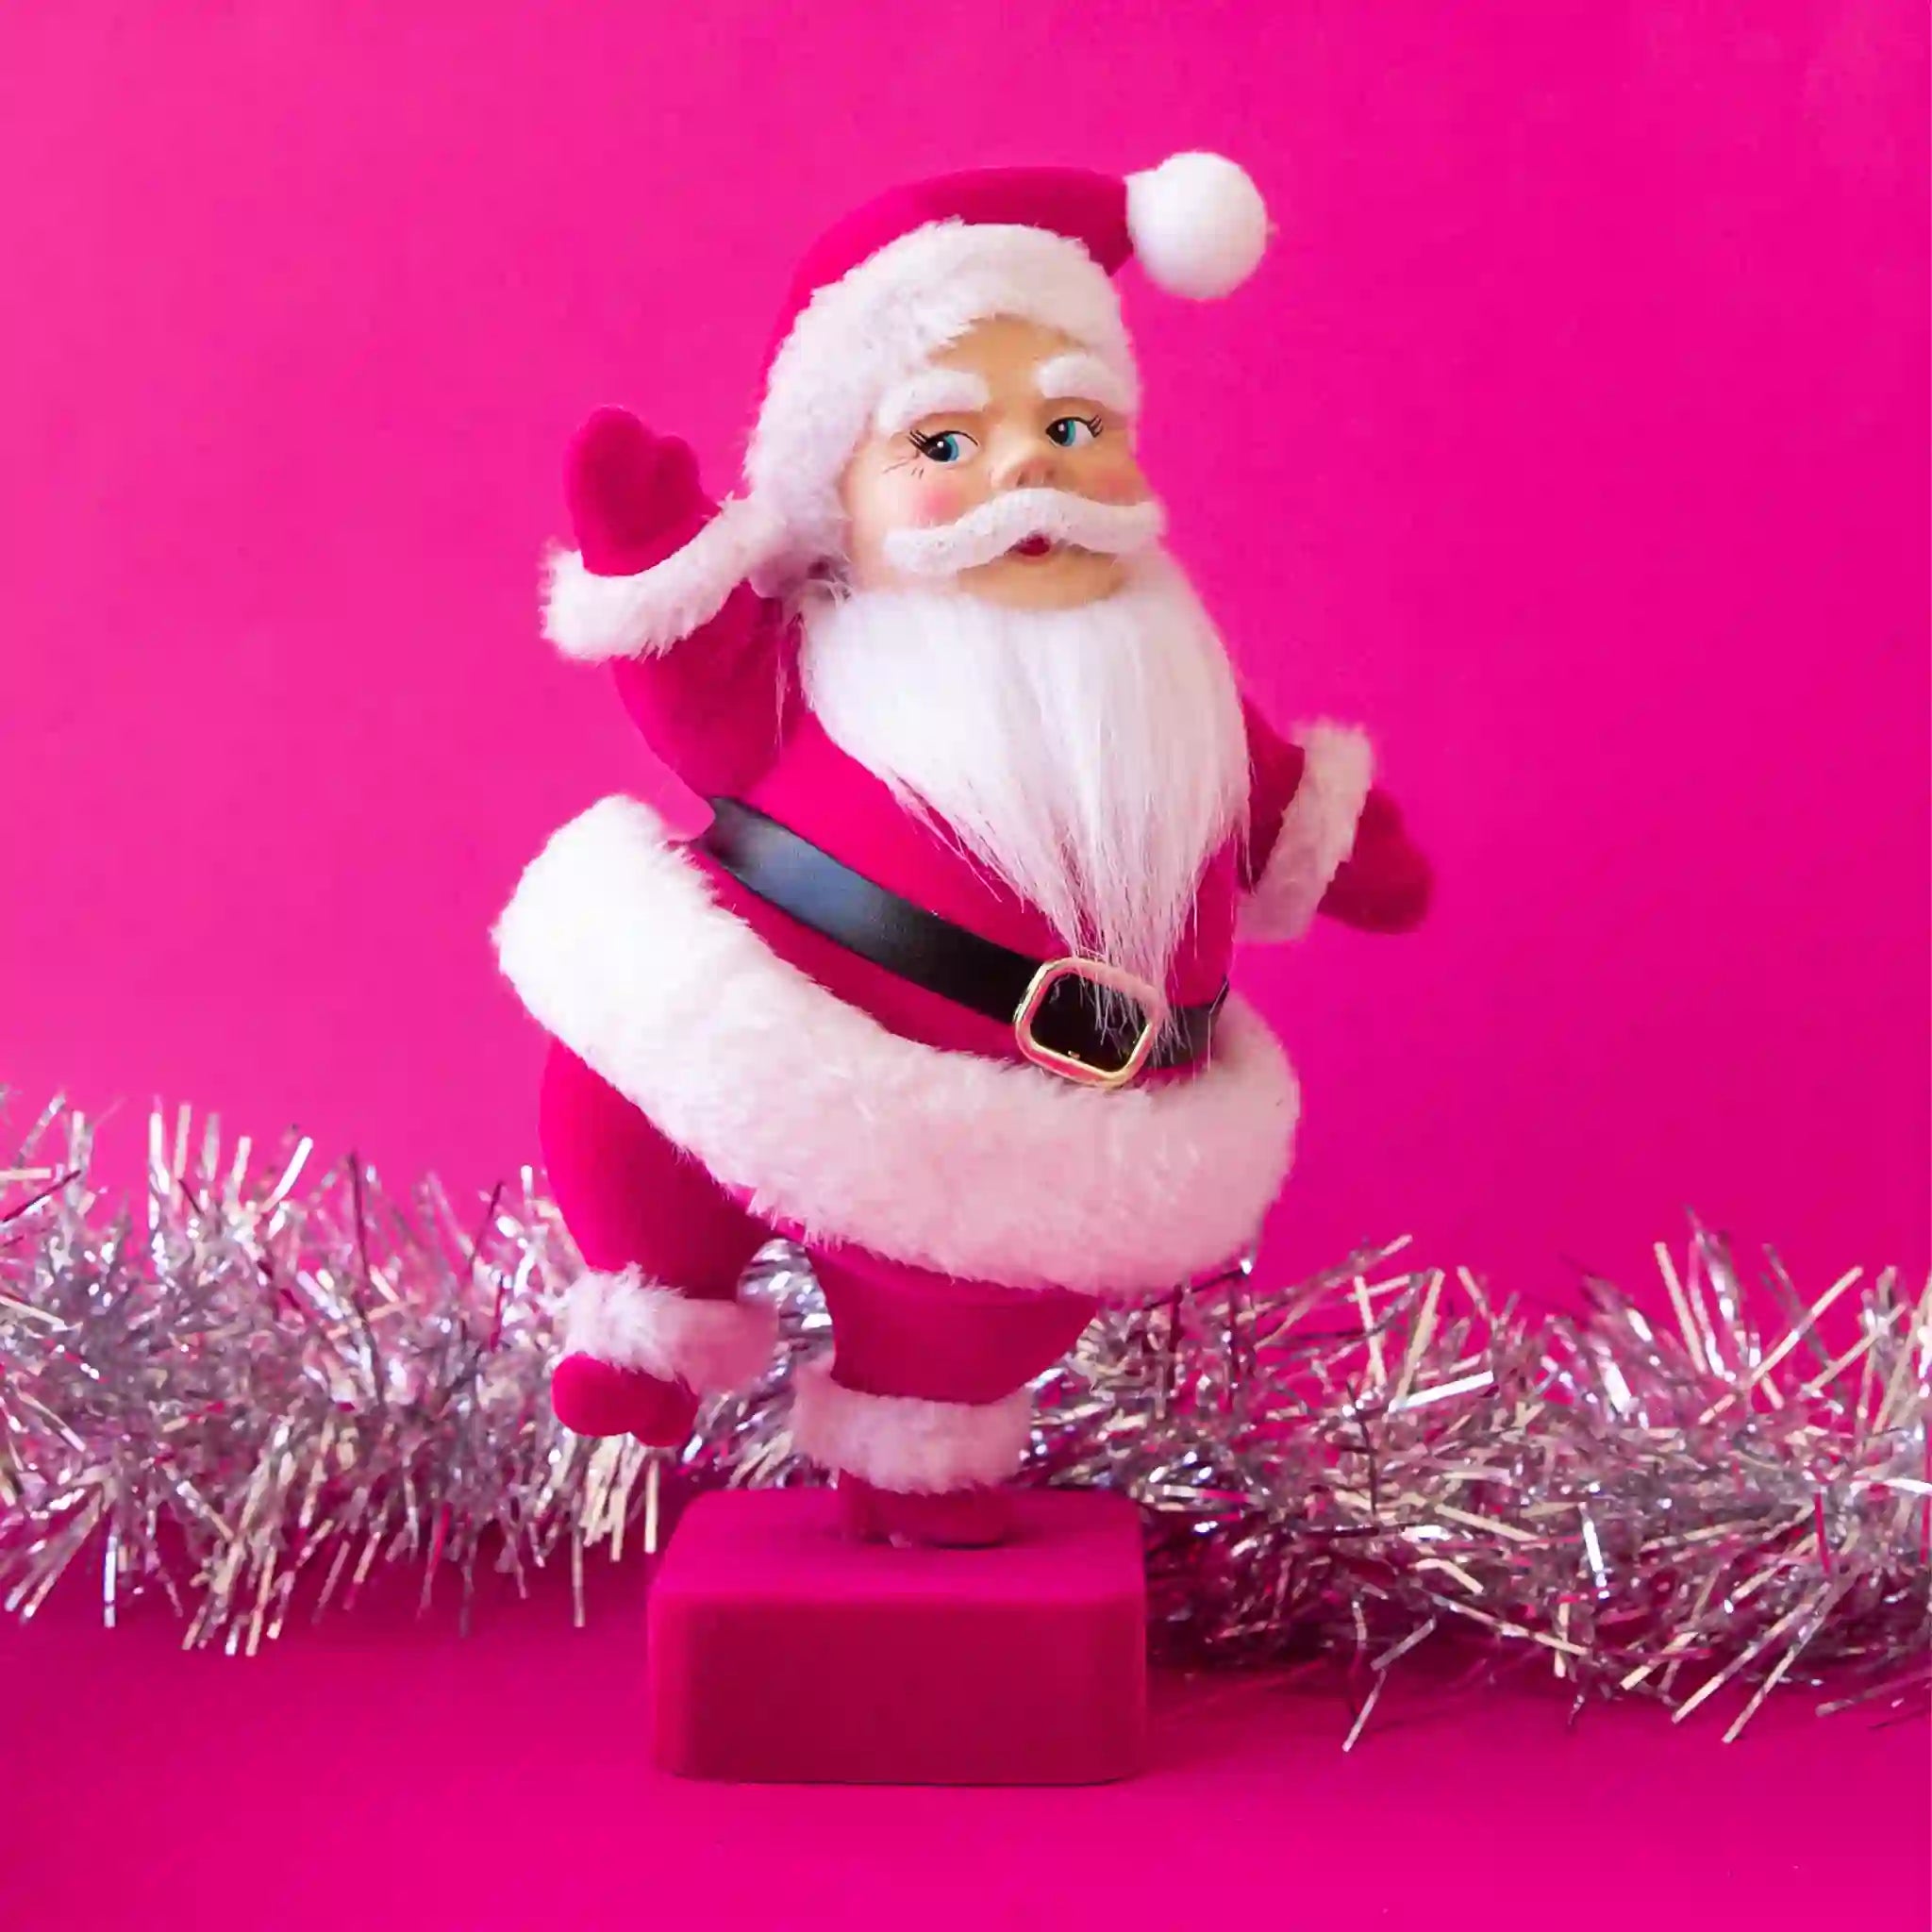 On a hot pink background is a hot pink flocked Santa shaped figurine holding a dancing pose.